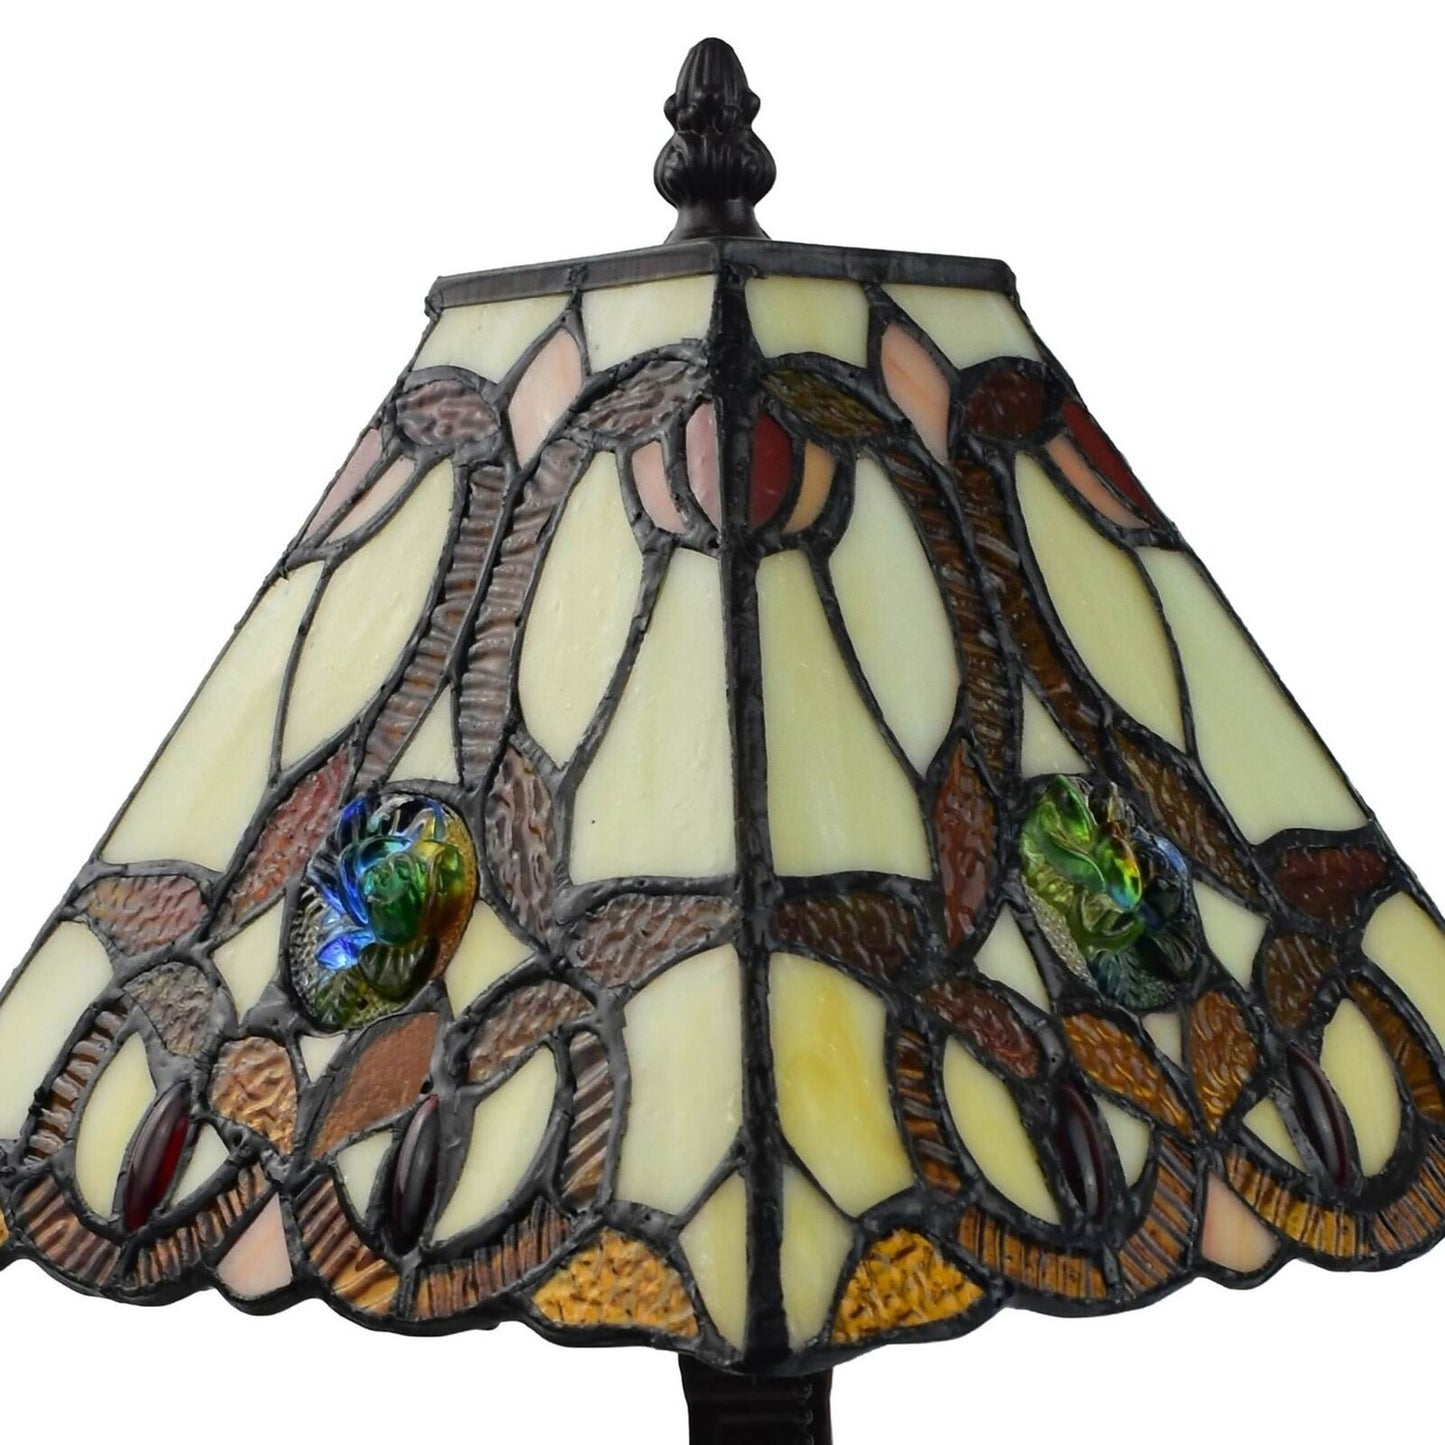 16-inch Tiffany Style Stained Glass Mini Floral Mission Accent Table Lamp